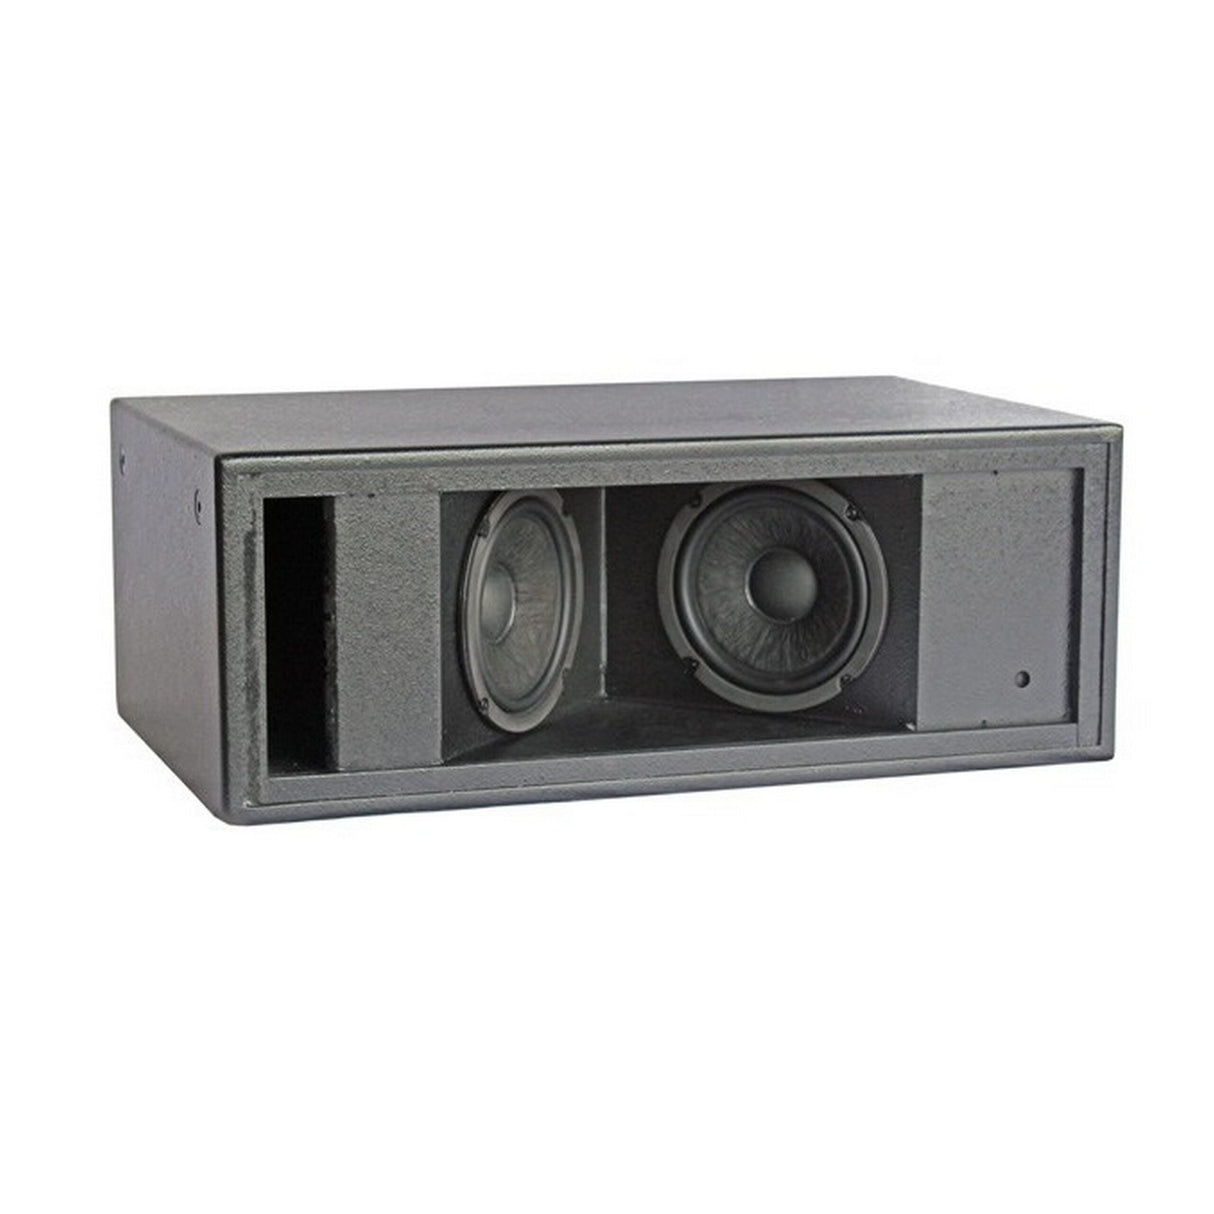 VUE Audiotechnik IS-26A Dual 6.5 Inch Compact Surface-Mount Powered Subwoofer